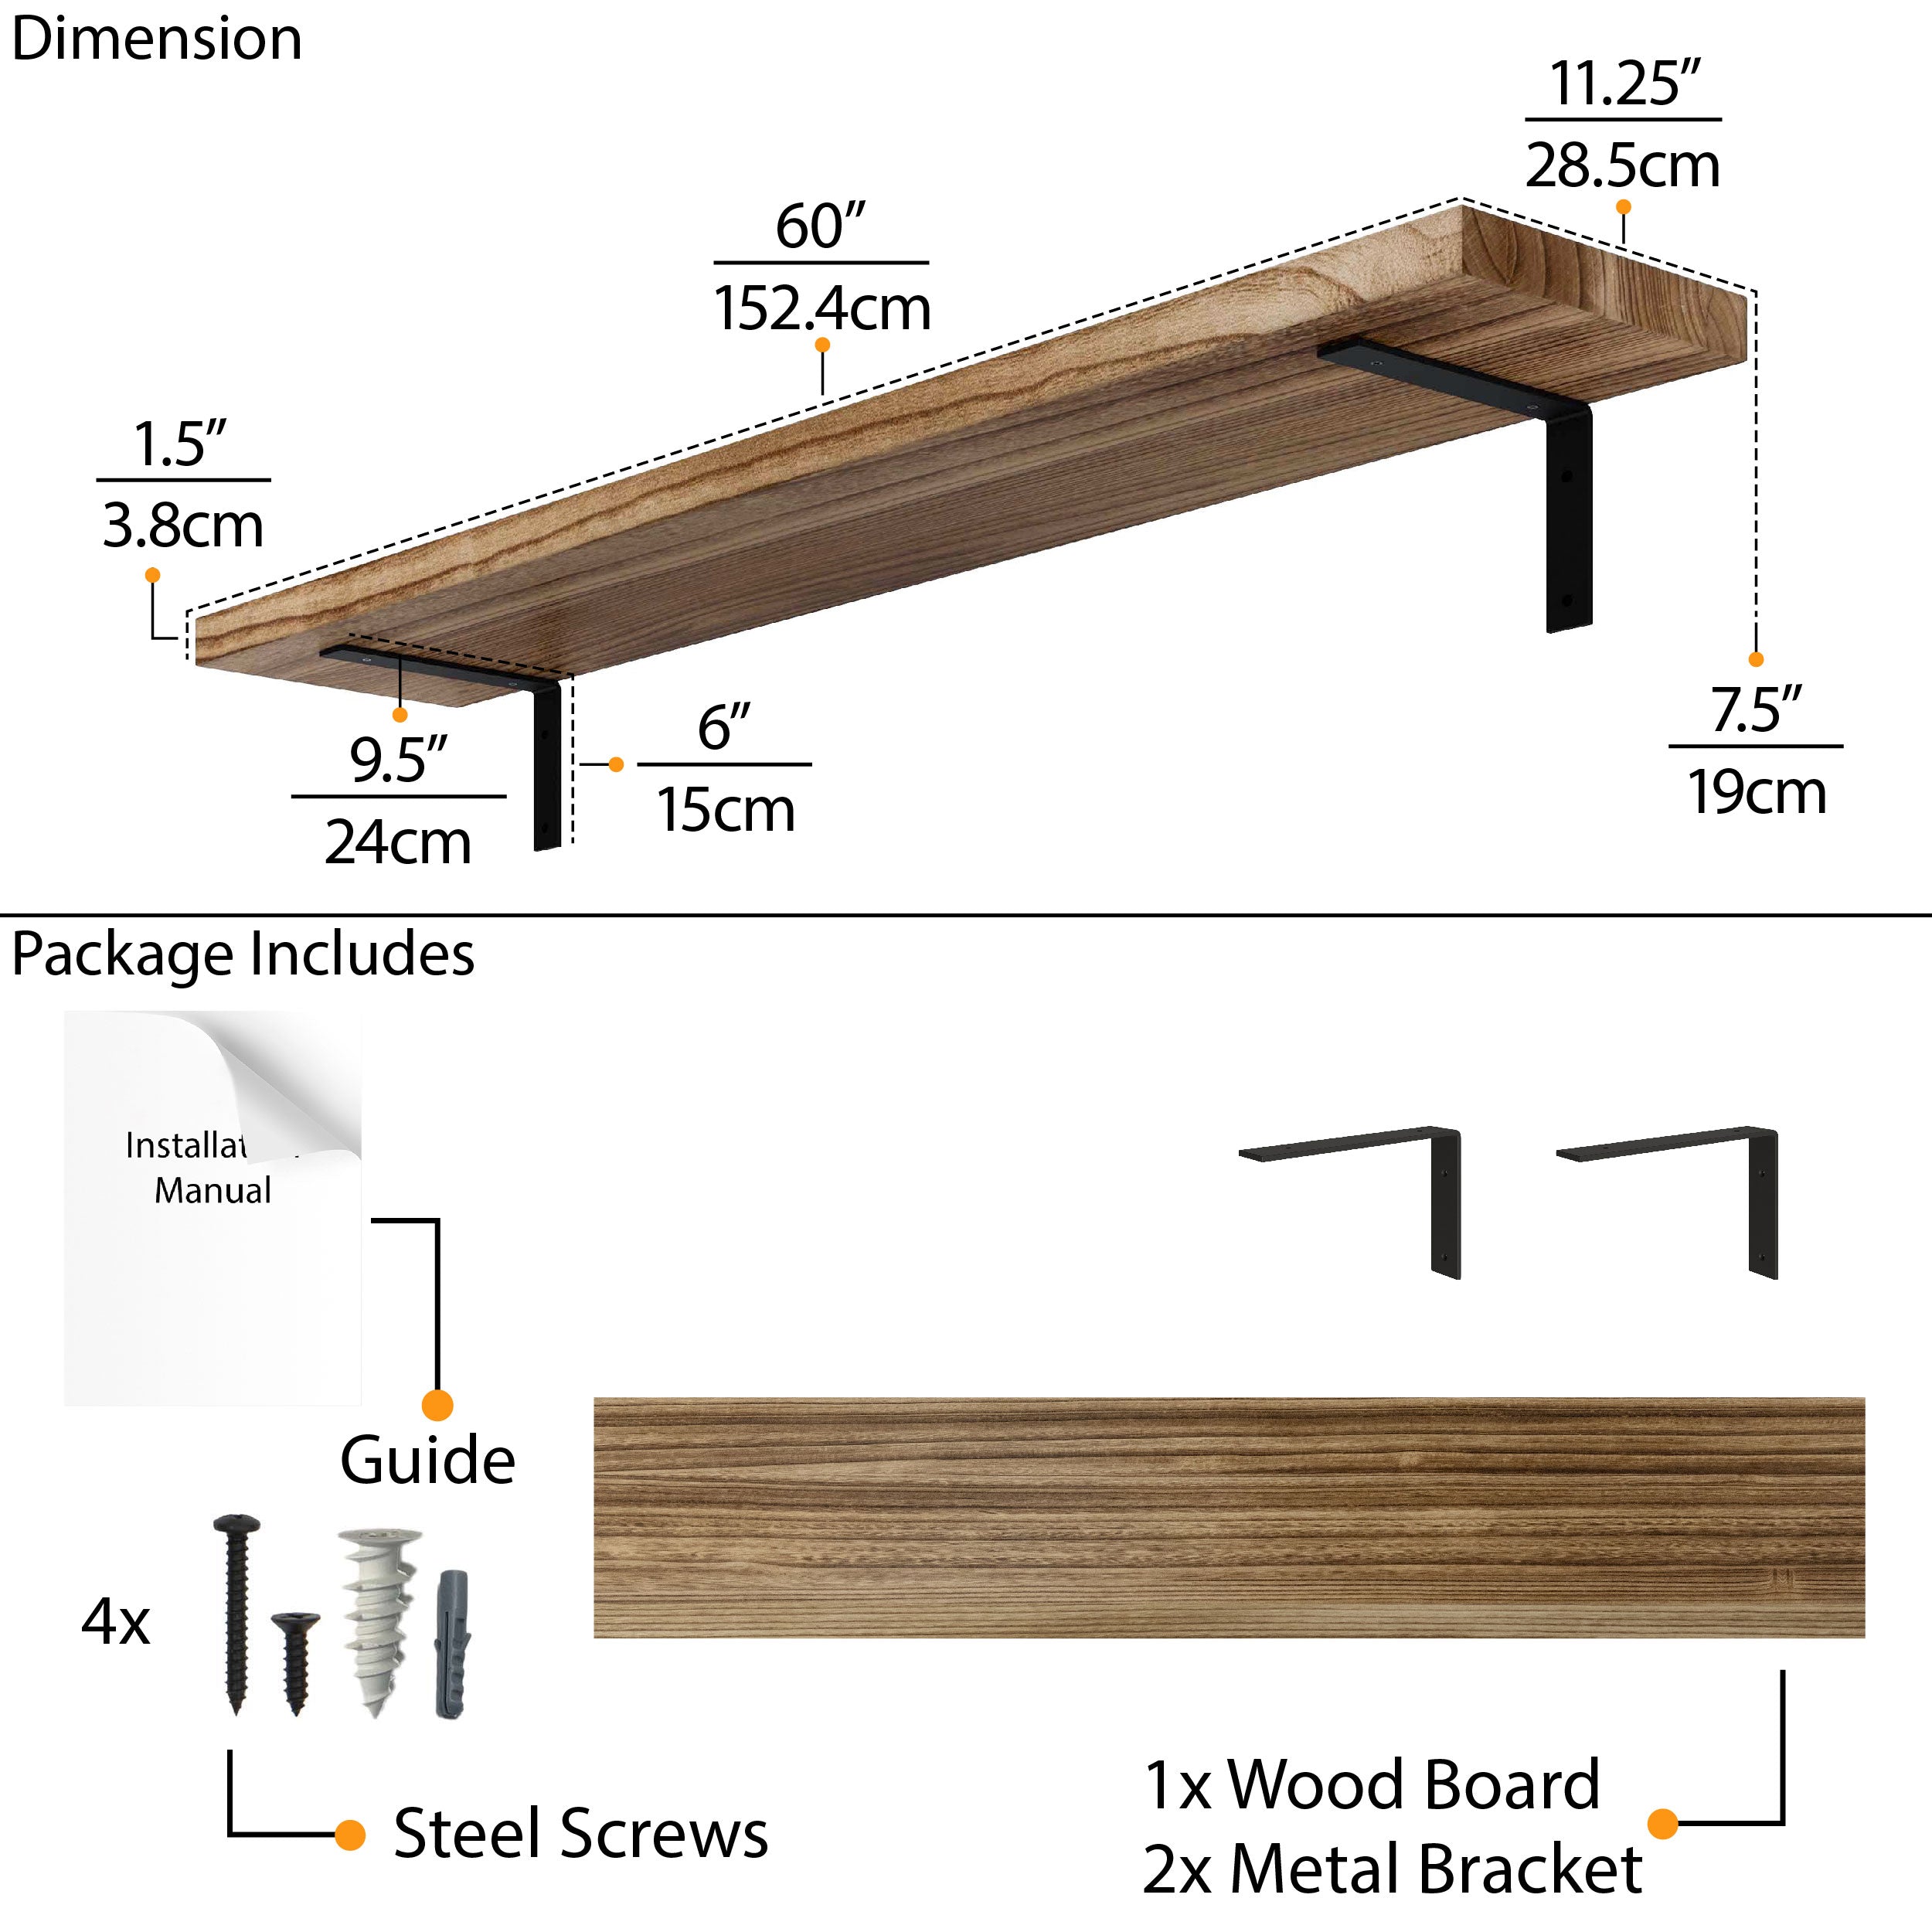 Wood wall shelf: 60" length, 1.5" thickness, 9.5" depth. Brackets extend 7.5" and 11.25" vertically. Package includes screws and installation manual.